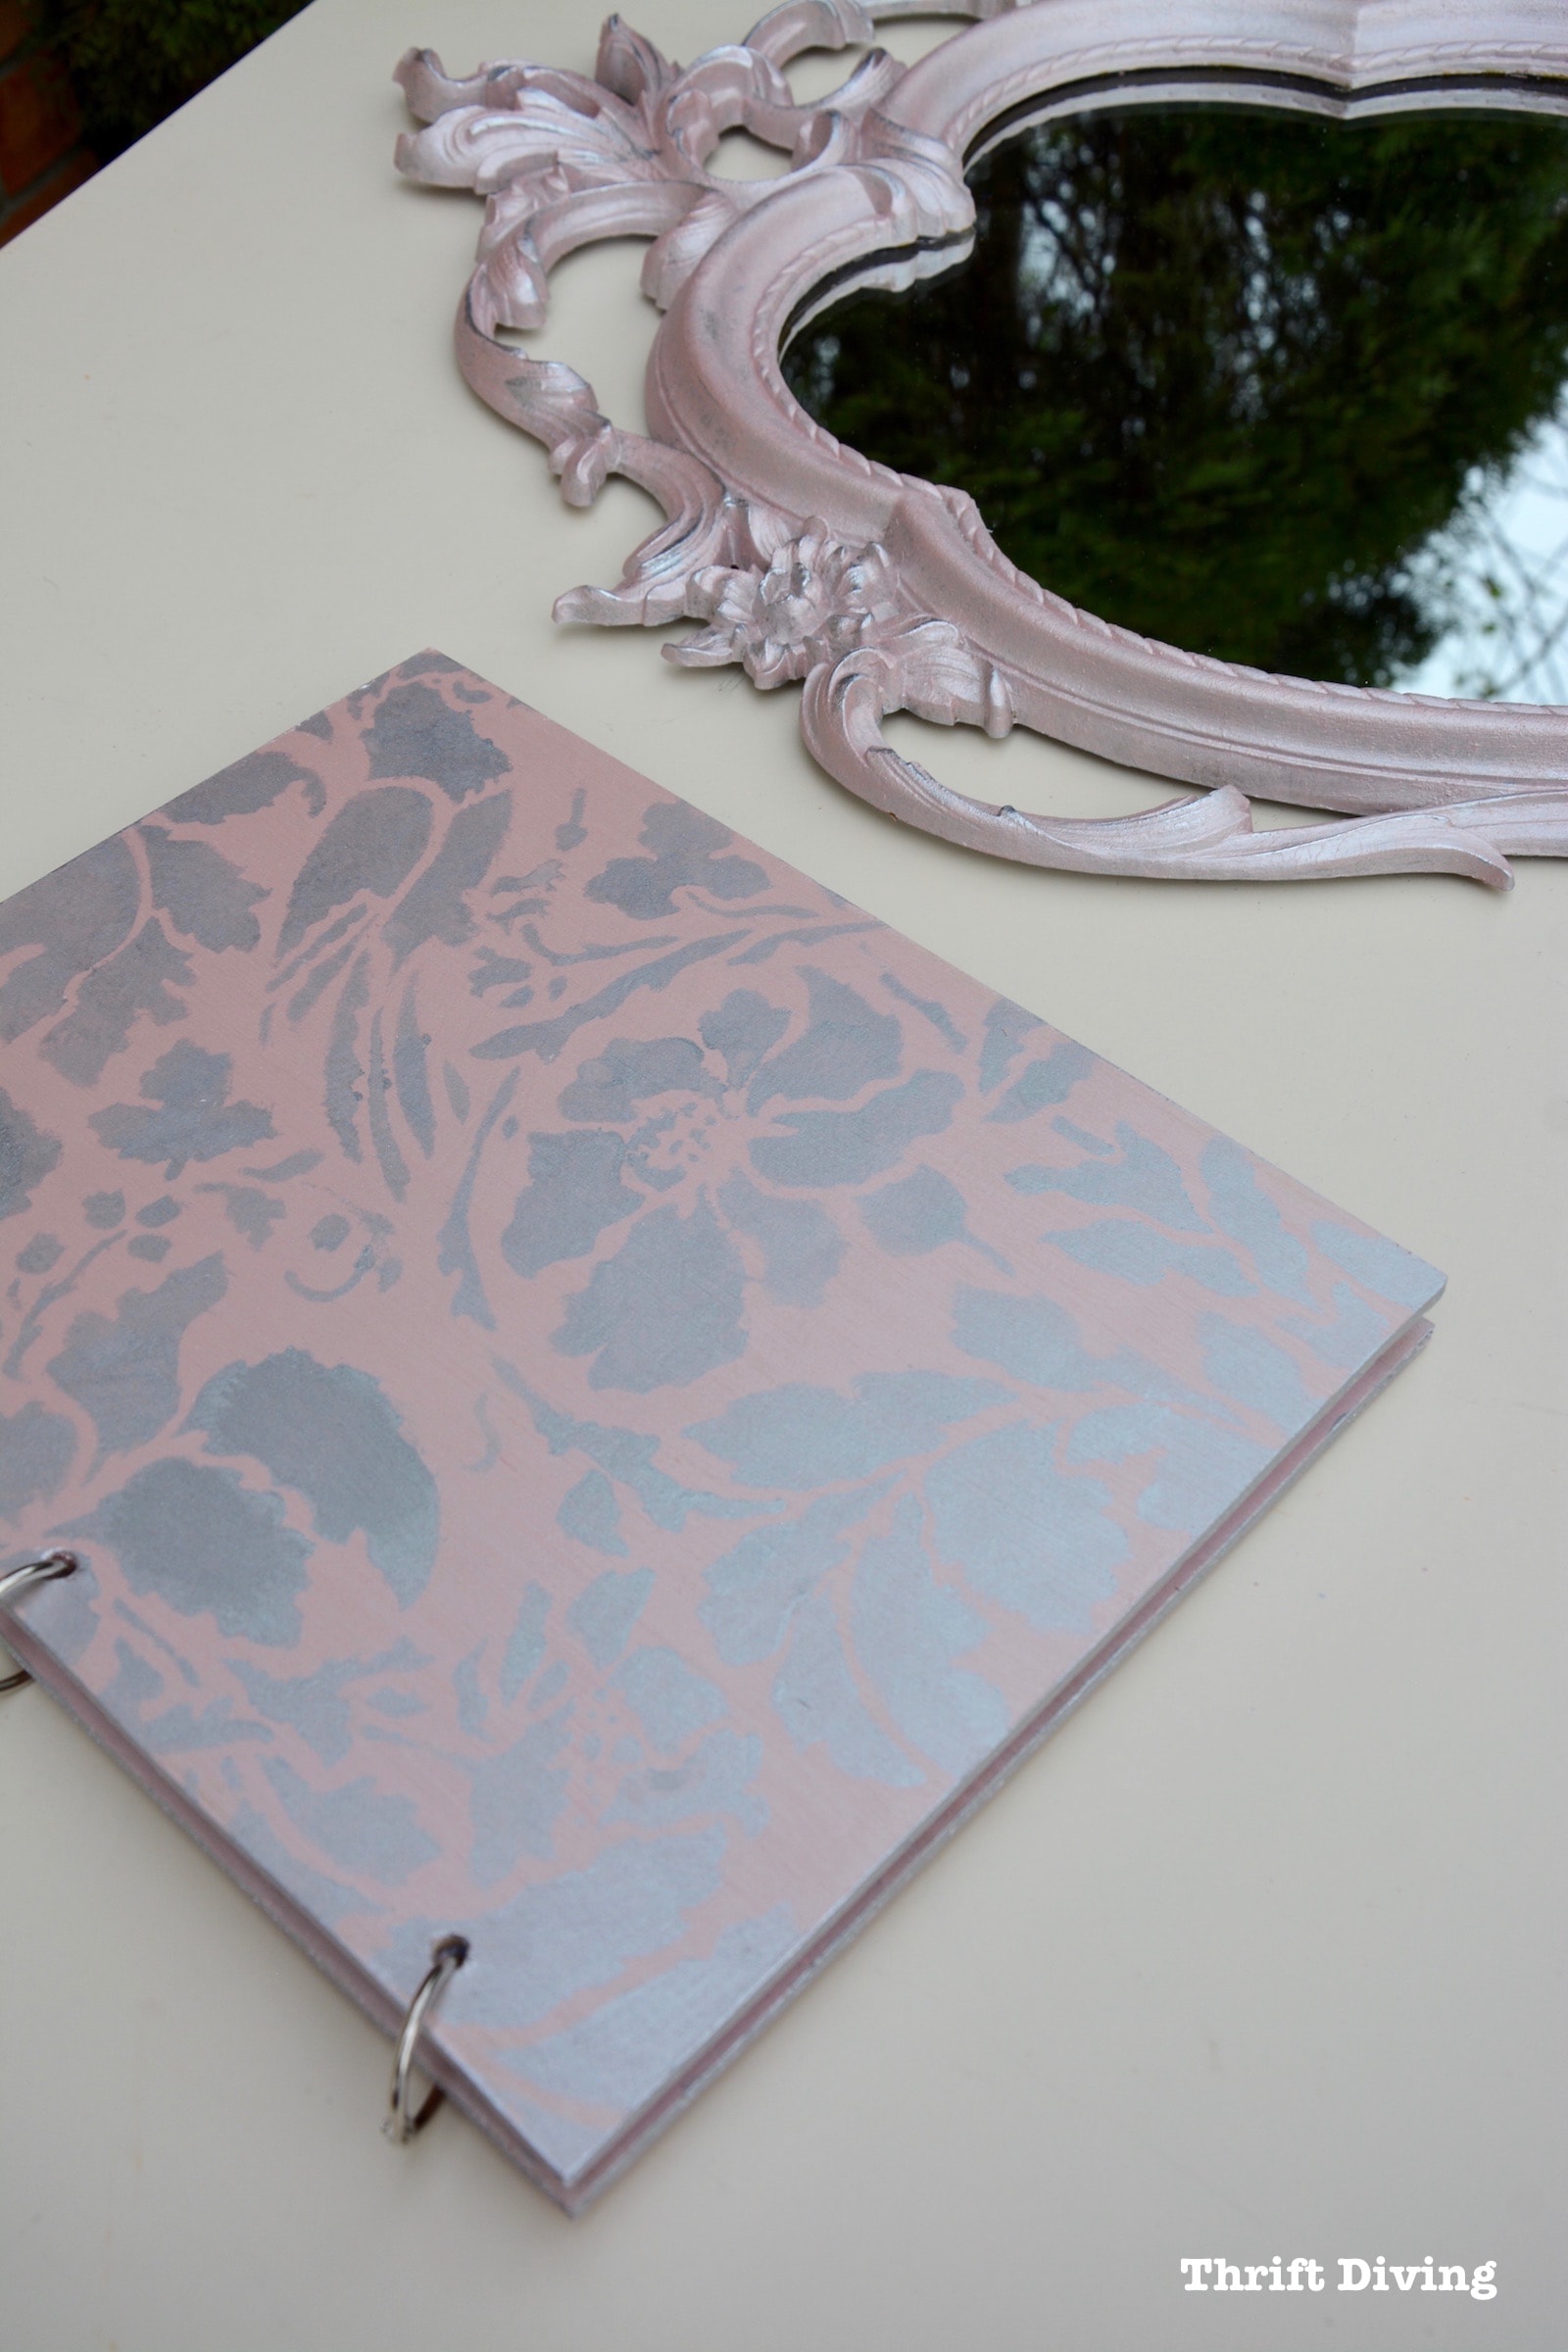 DIY Painted Mirror and Stenciled DIY Wooden Notebook - Thrift Diving - 0317